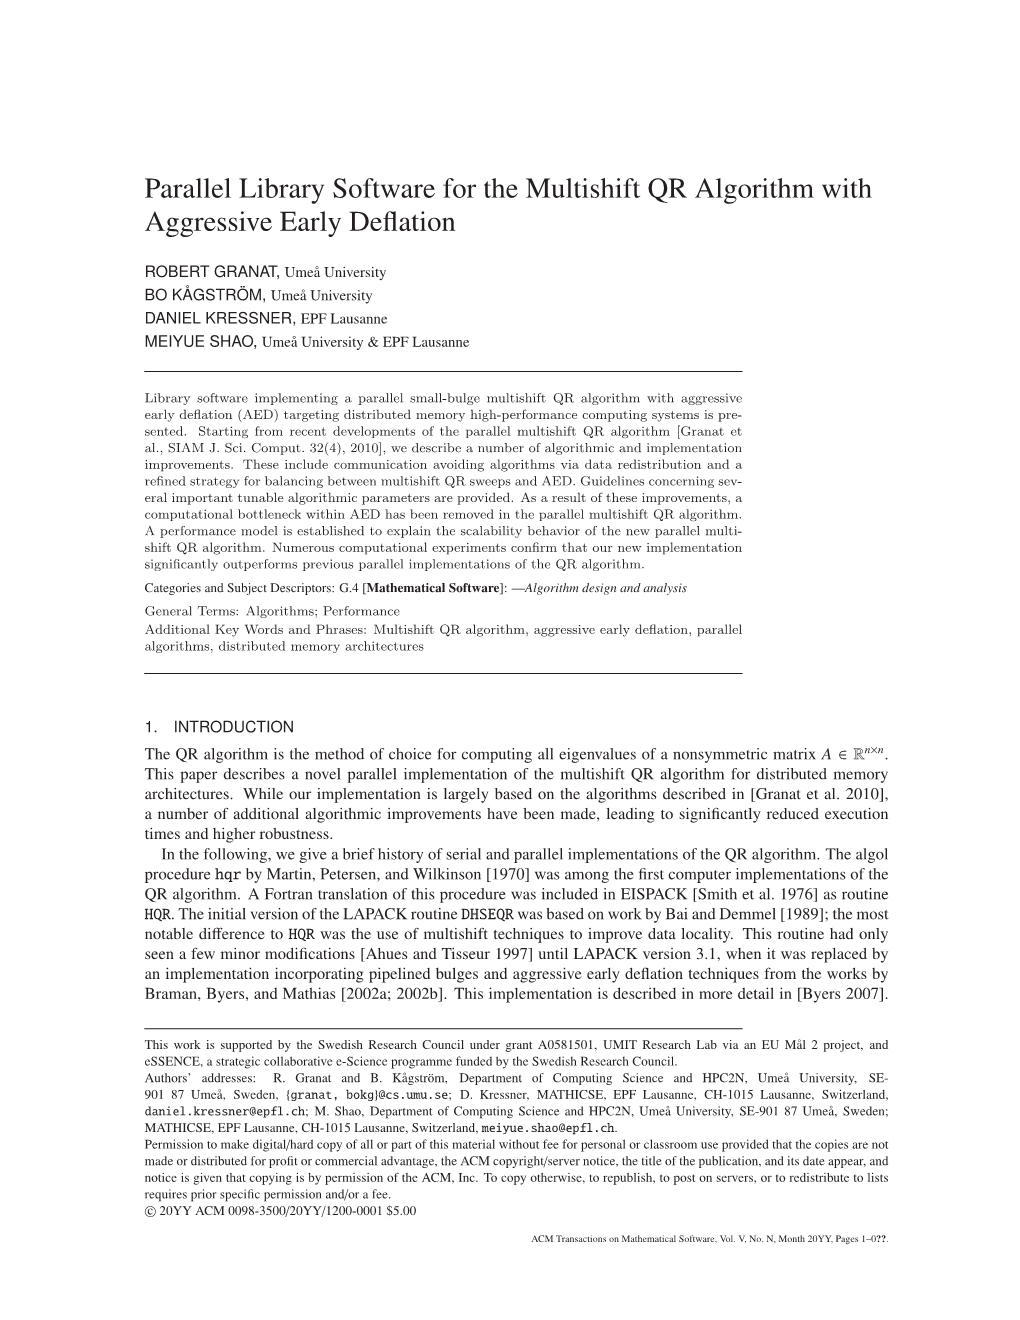 Parallel Library Software for the Multishift QR Algorithm with Aggressive Early Deﬂation